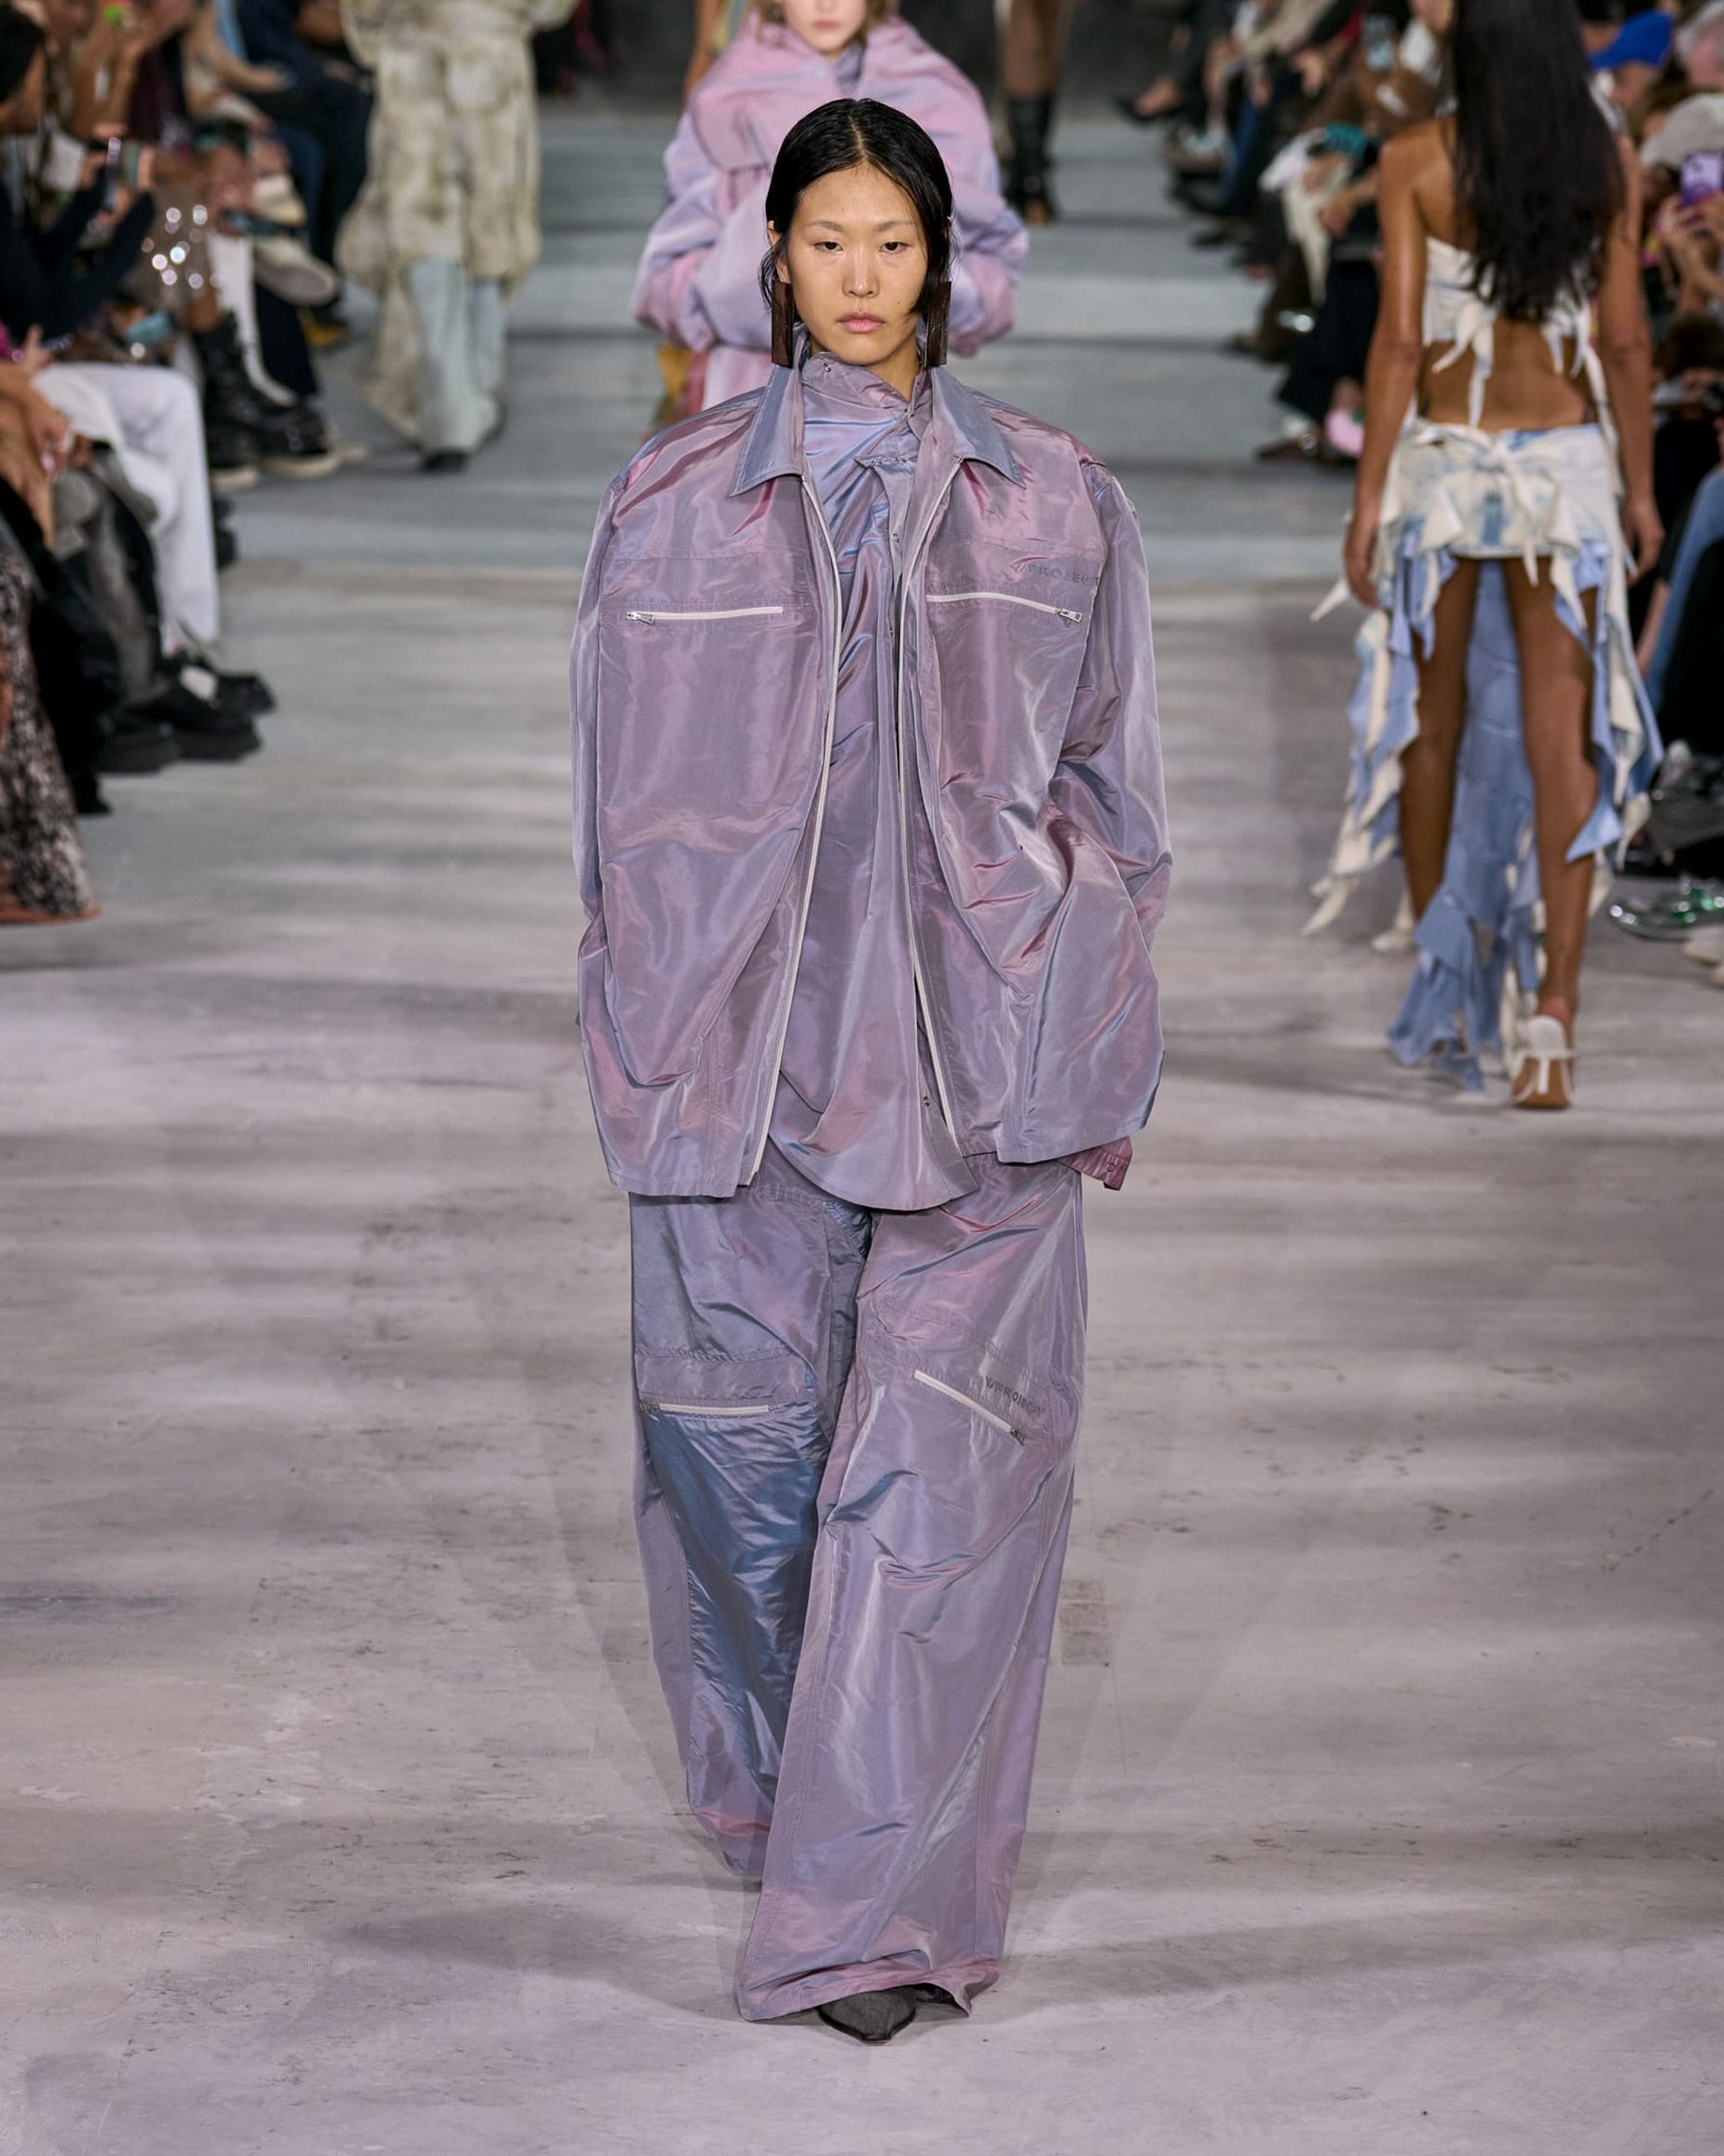 Iridescent taffeta helped achieve the "dark majesty" the designer was reaching for, according to his show notes.